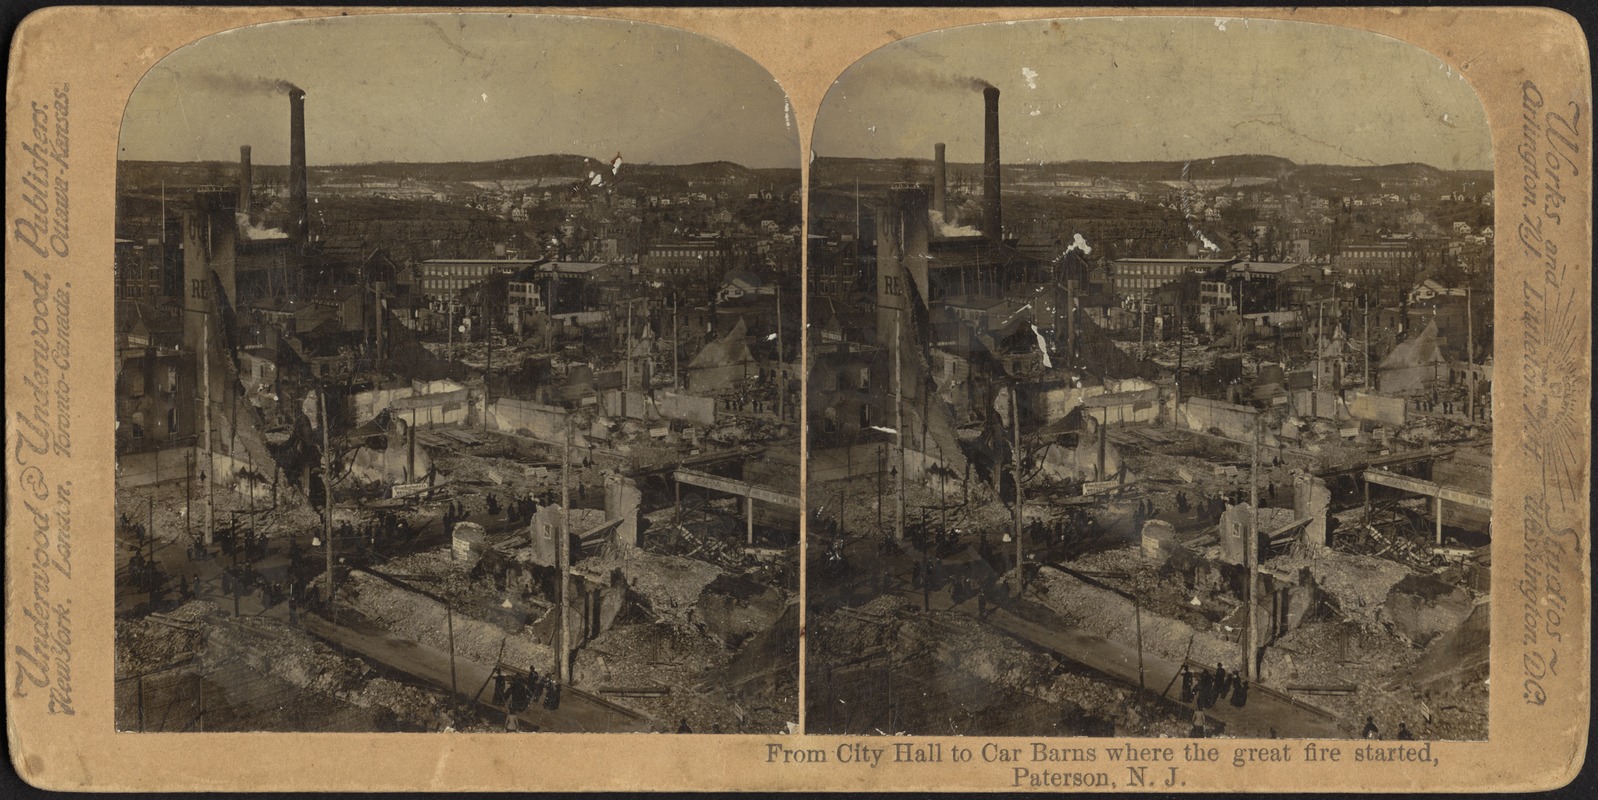 From City Hall to car barns where the great fire started, Paterson, N.J.